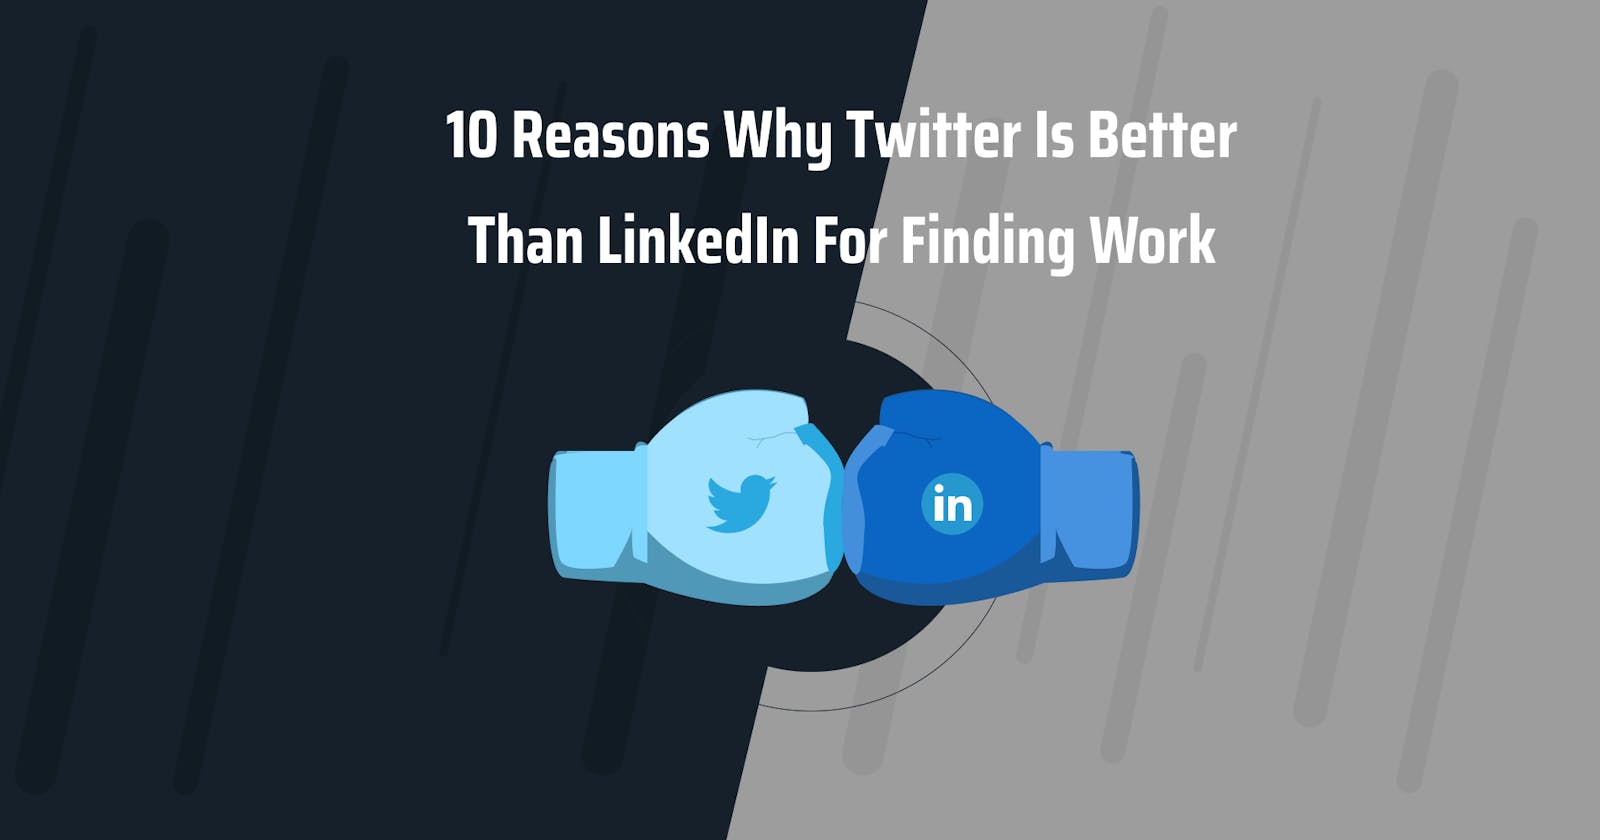 10 reasons why Twitter is better than LinkedIn for finding work